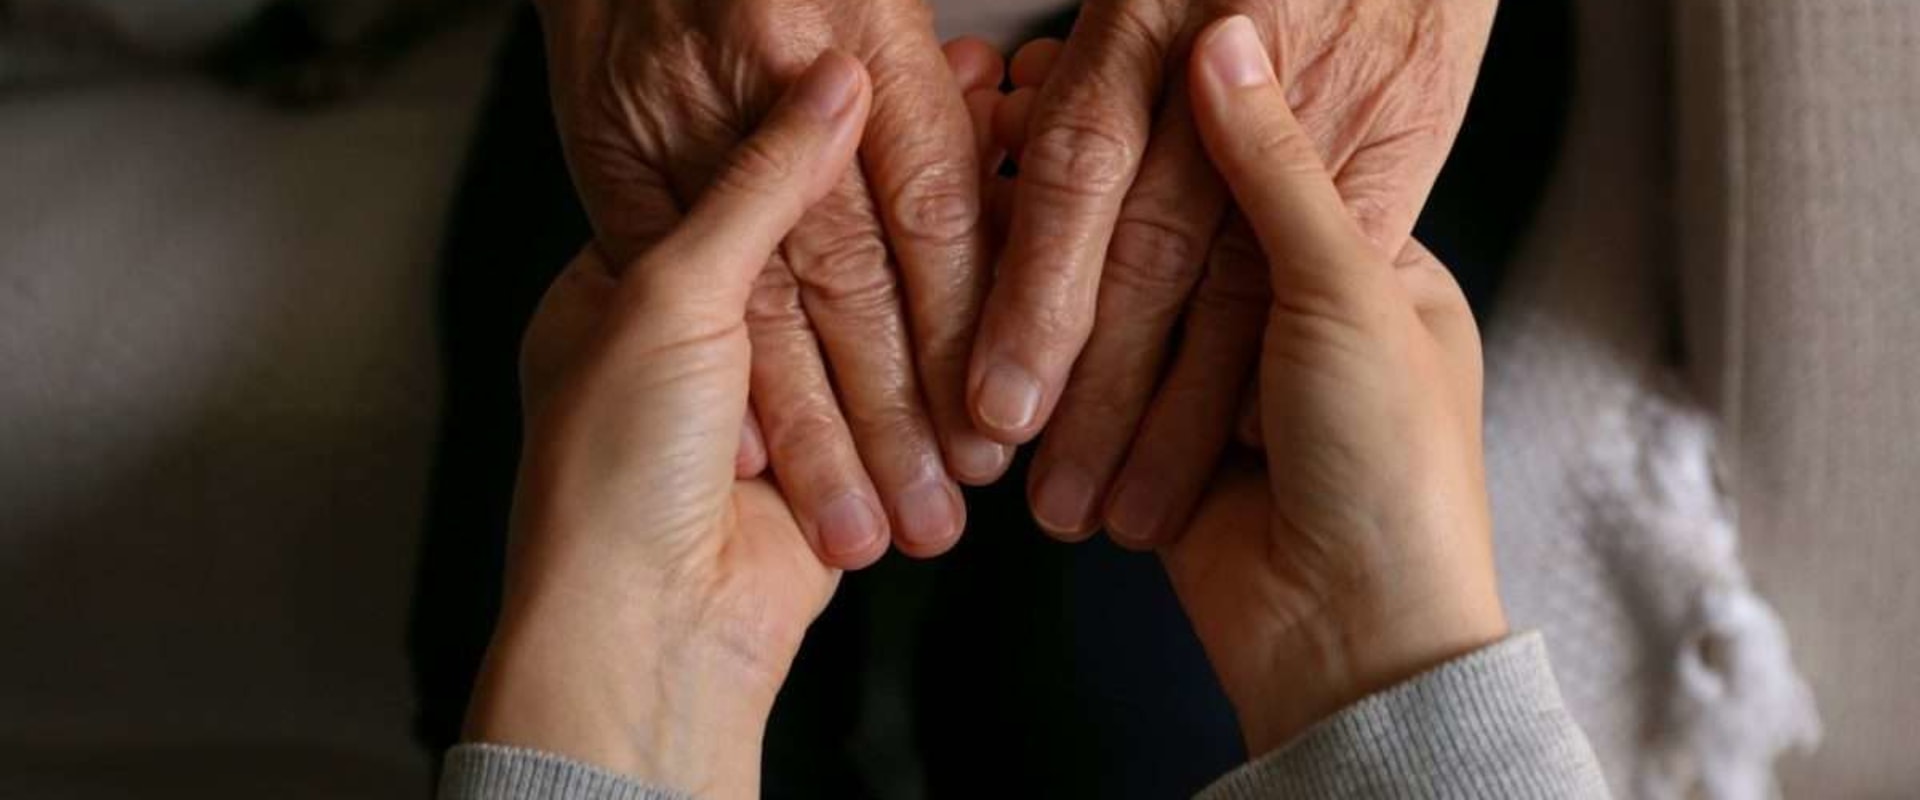 What are the three most important qualities of a caregiver?